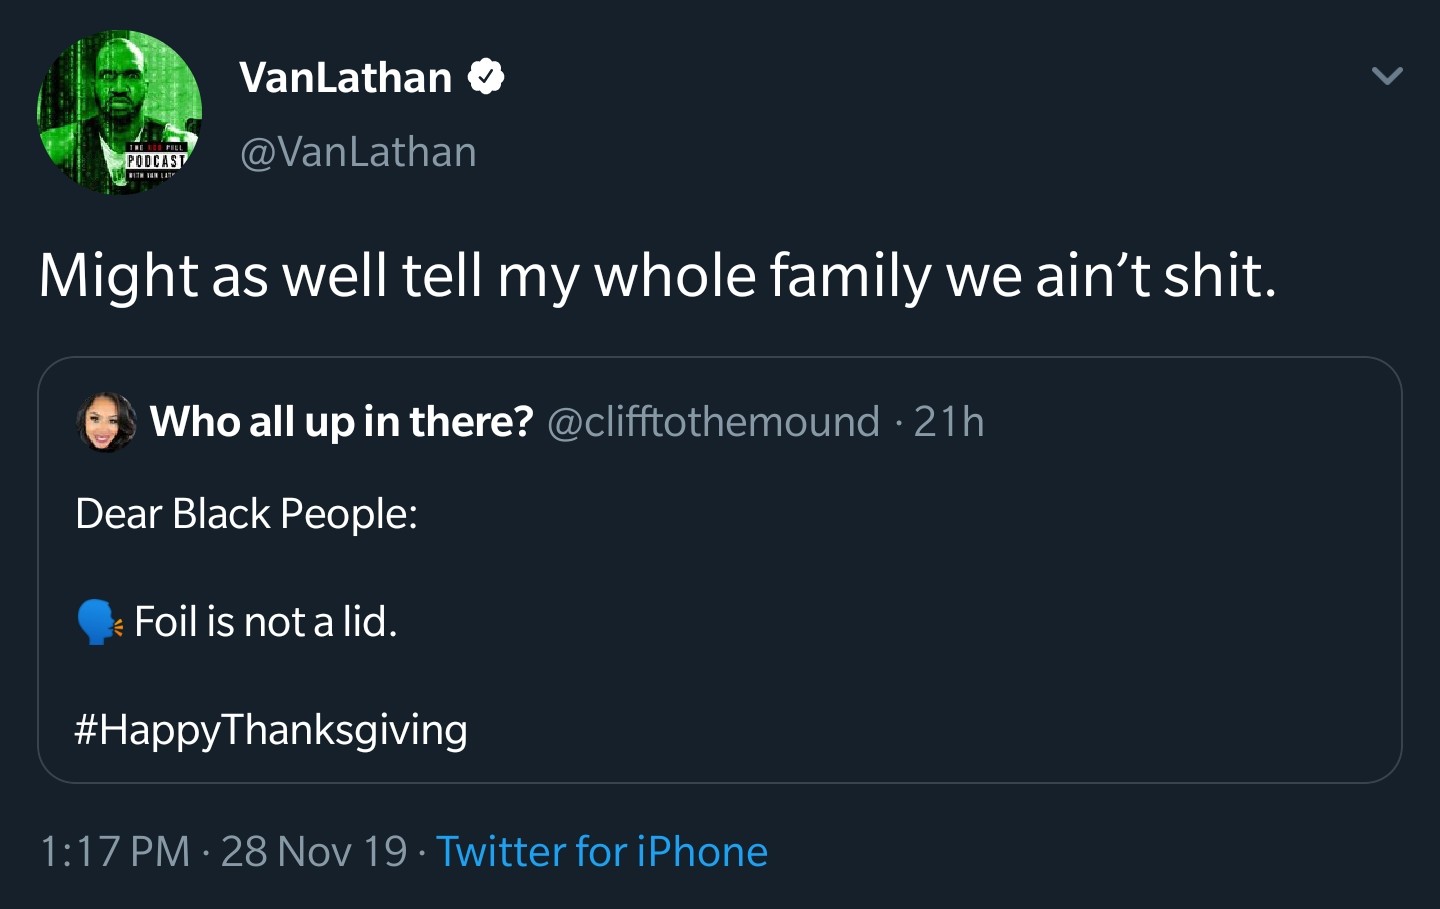 Broken heart - VanLathan The Eu Fill Podcast Litf Might as well tell my whole family we ain't shit. Who all up in there? 21h Dear Black People Foil is not a lid. 28 Nov 19. Twitter for iPhone